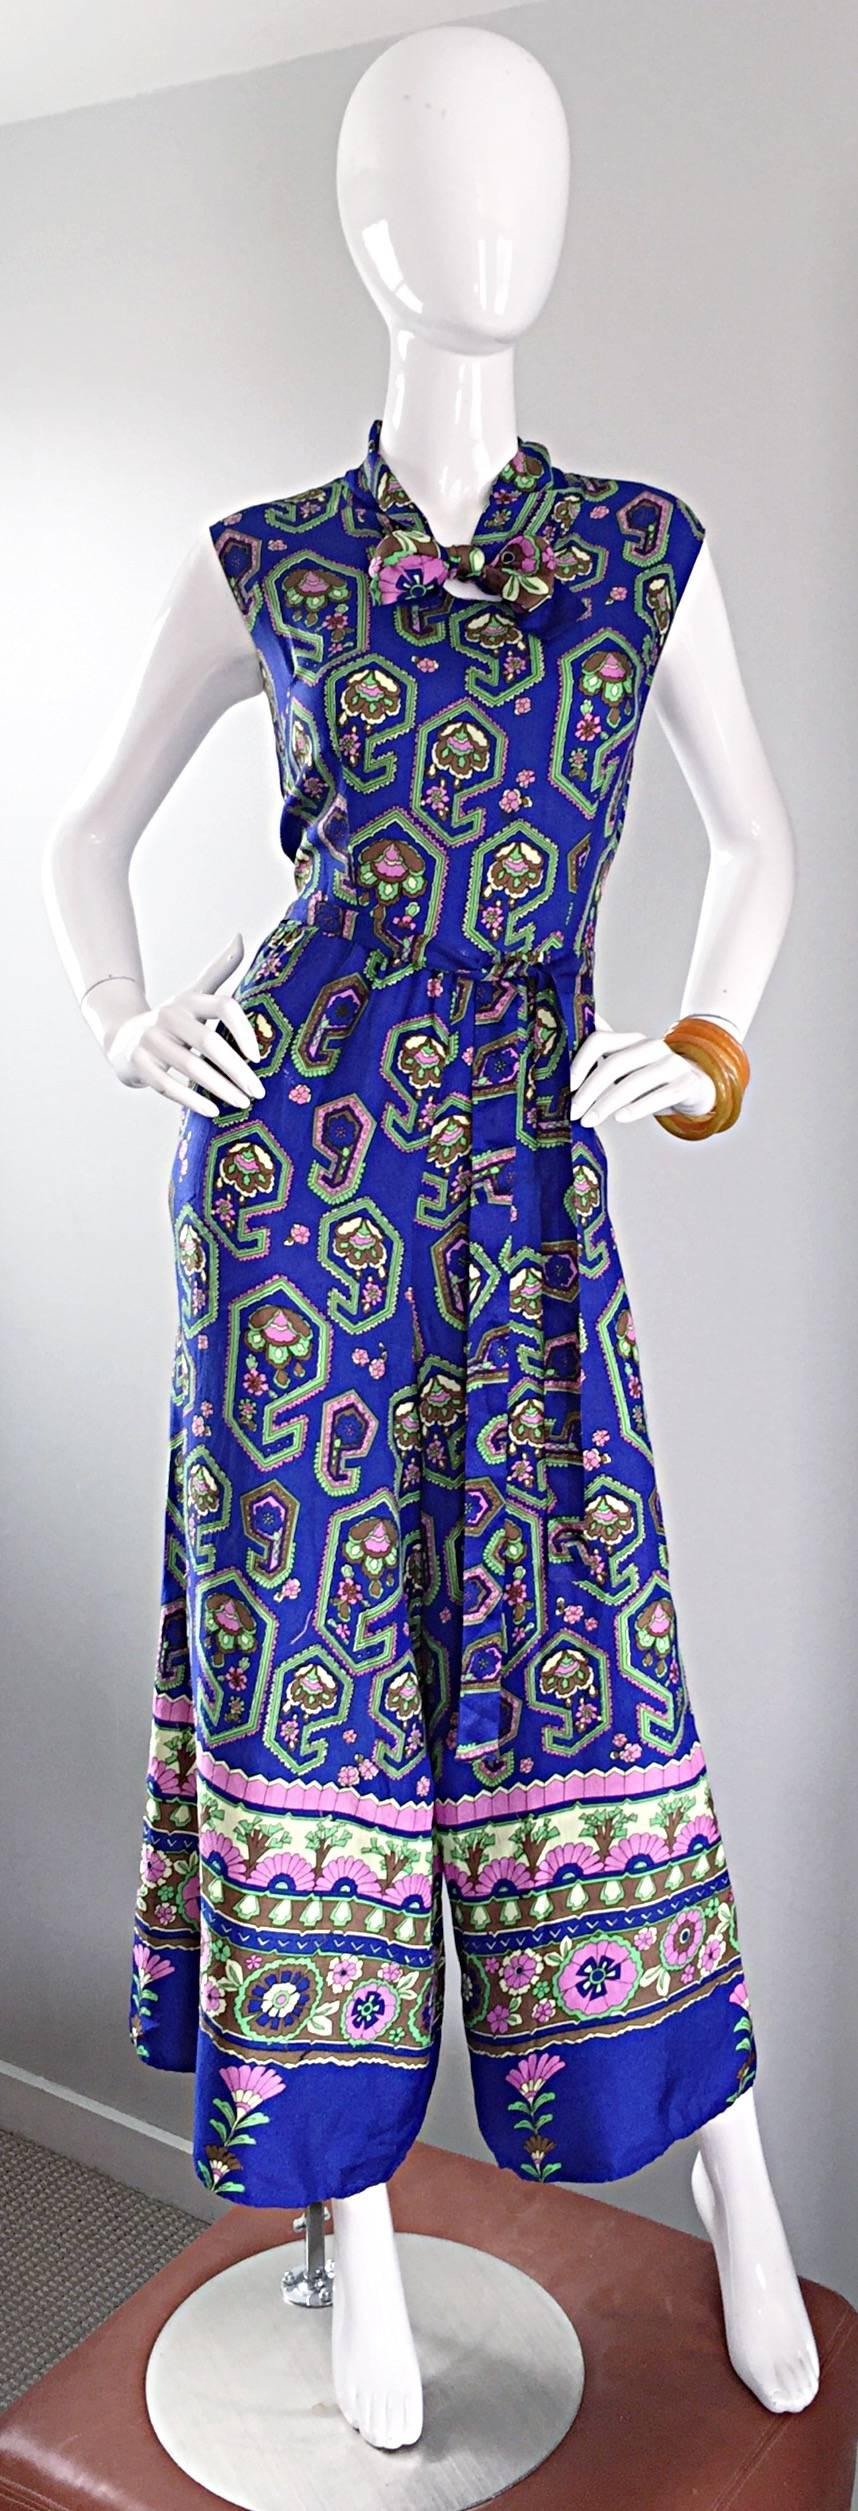 Phenomenal 70s wide palazzo leg jumpsuit! Vibrant blue color with multi color geometric paisley print throughout. Detachable sash belt. Pussycat bow above bust. Pockets at both sides of the waist. Hidden zipper up the back. No fabric tag, but feels